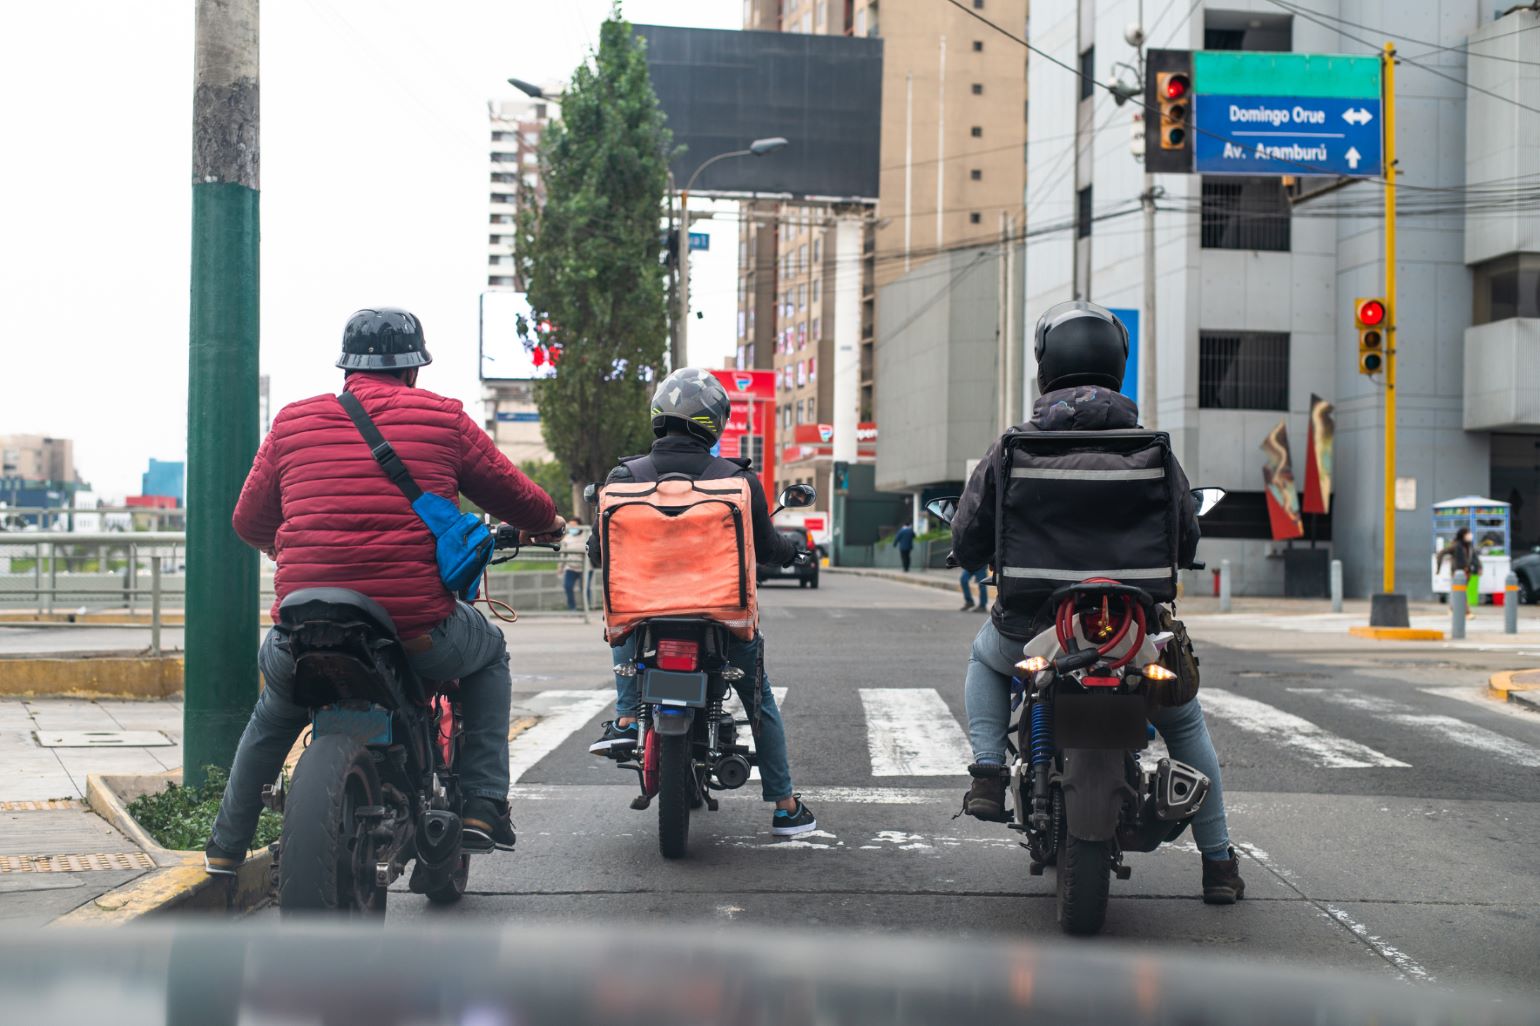 Gas scooters are widely used as delivery vehicles - Keego Mobility